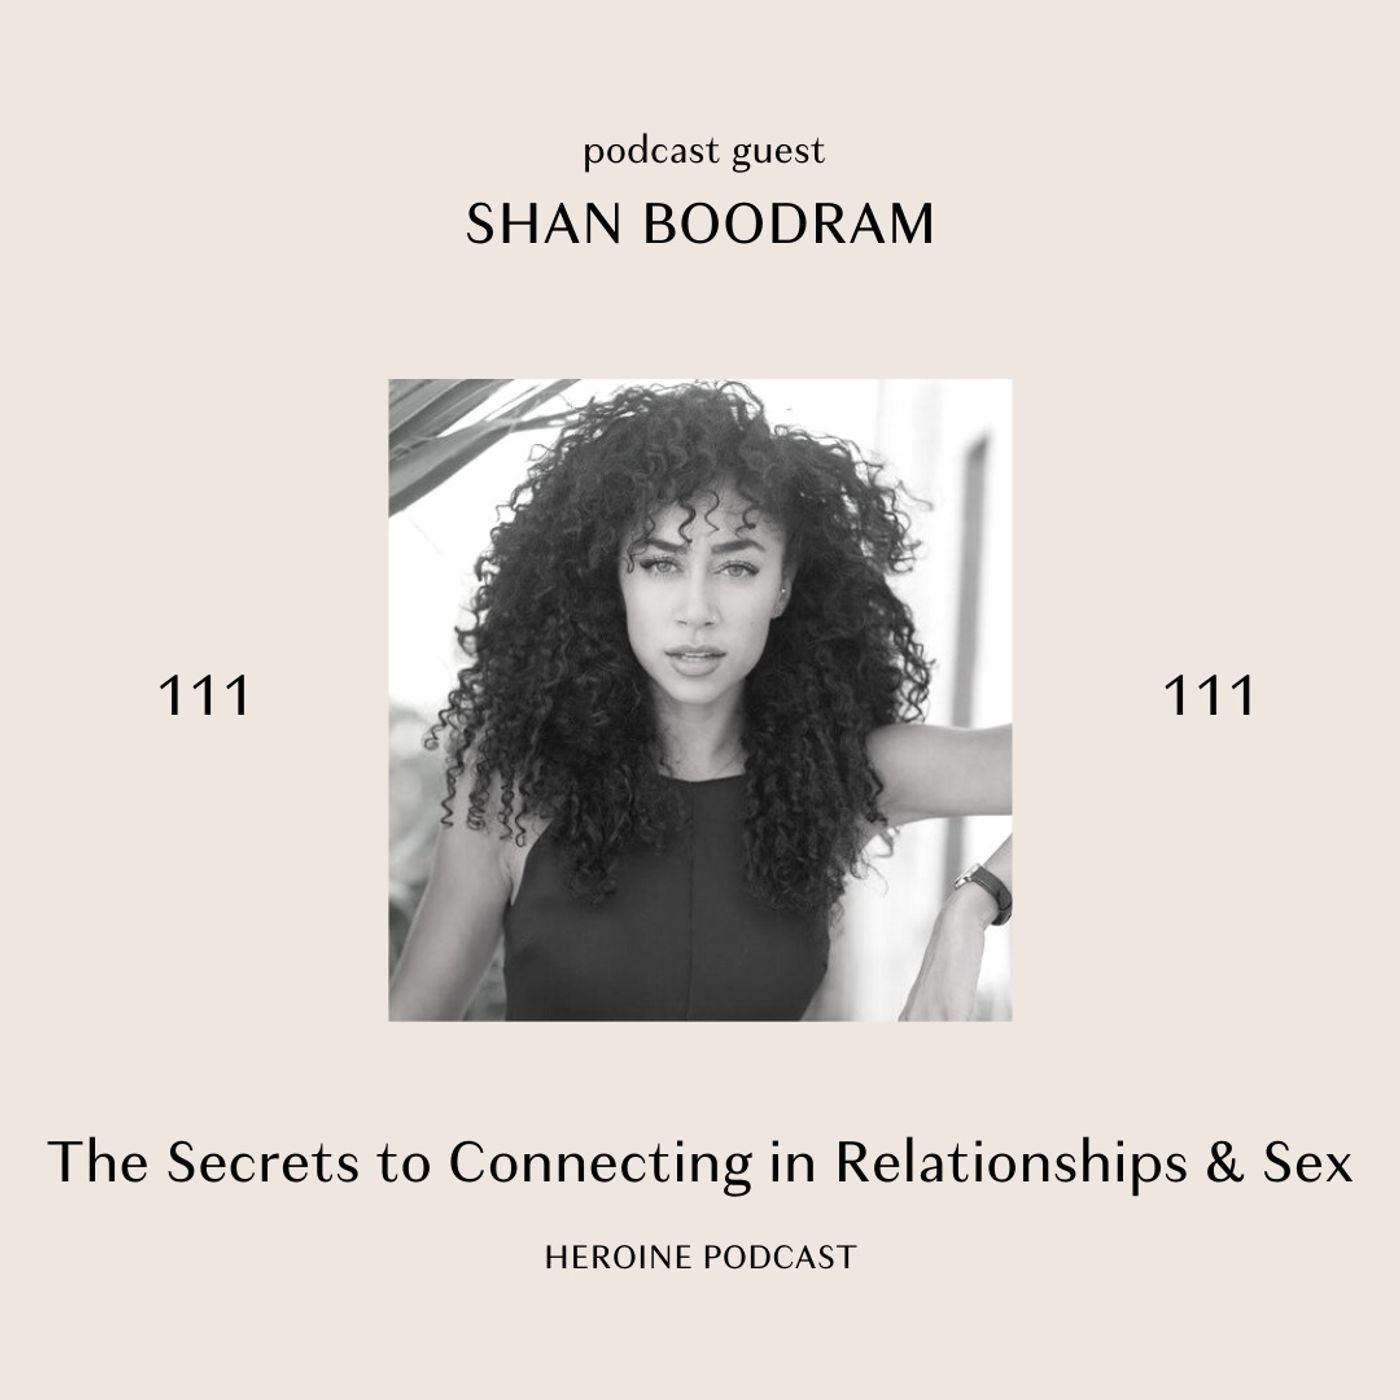 The Secrets to Connecting in Relationships & Sex — Shan Boodram